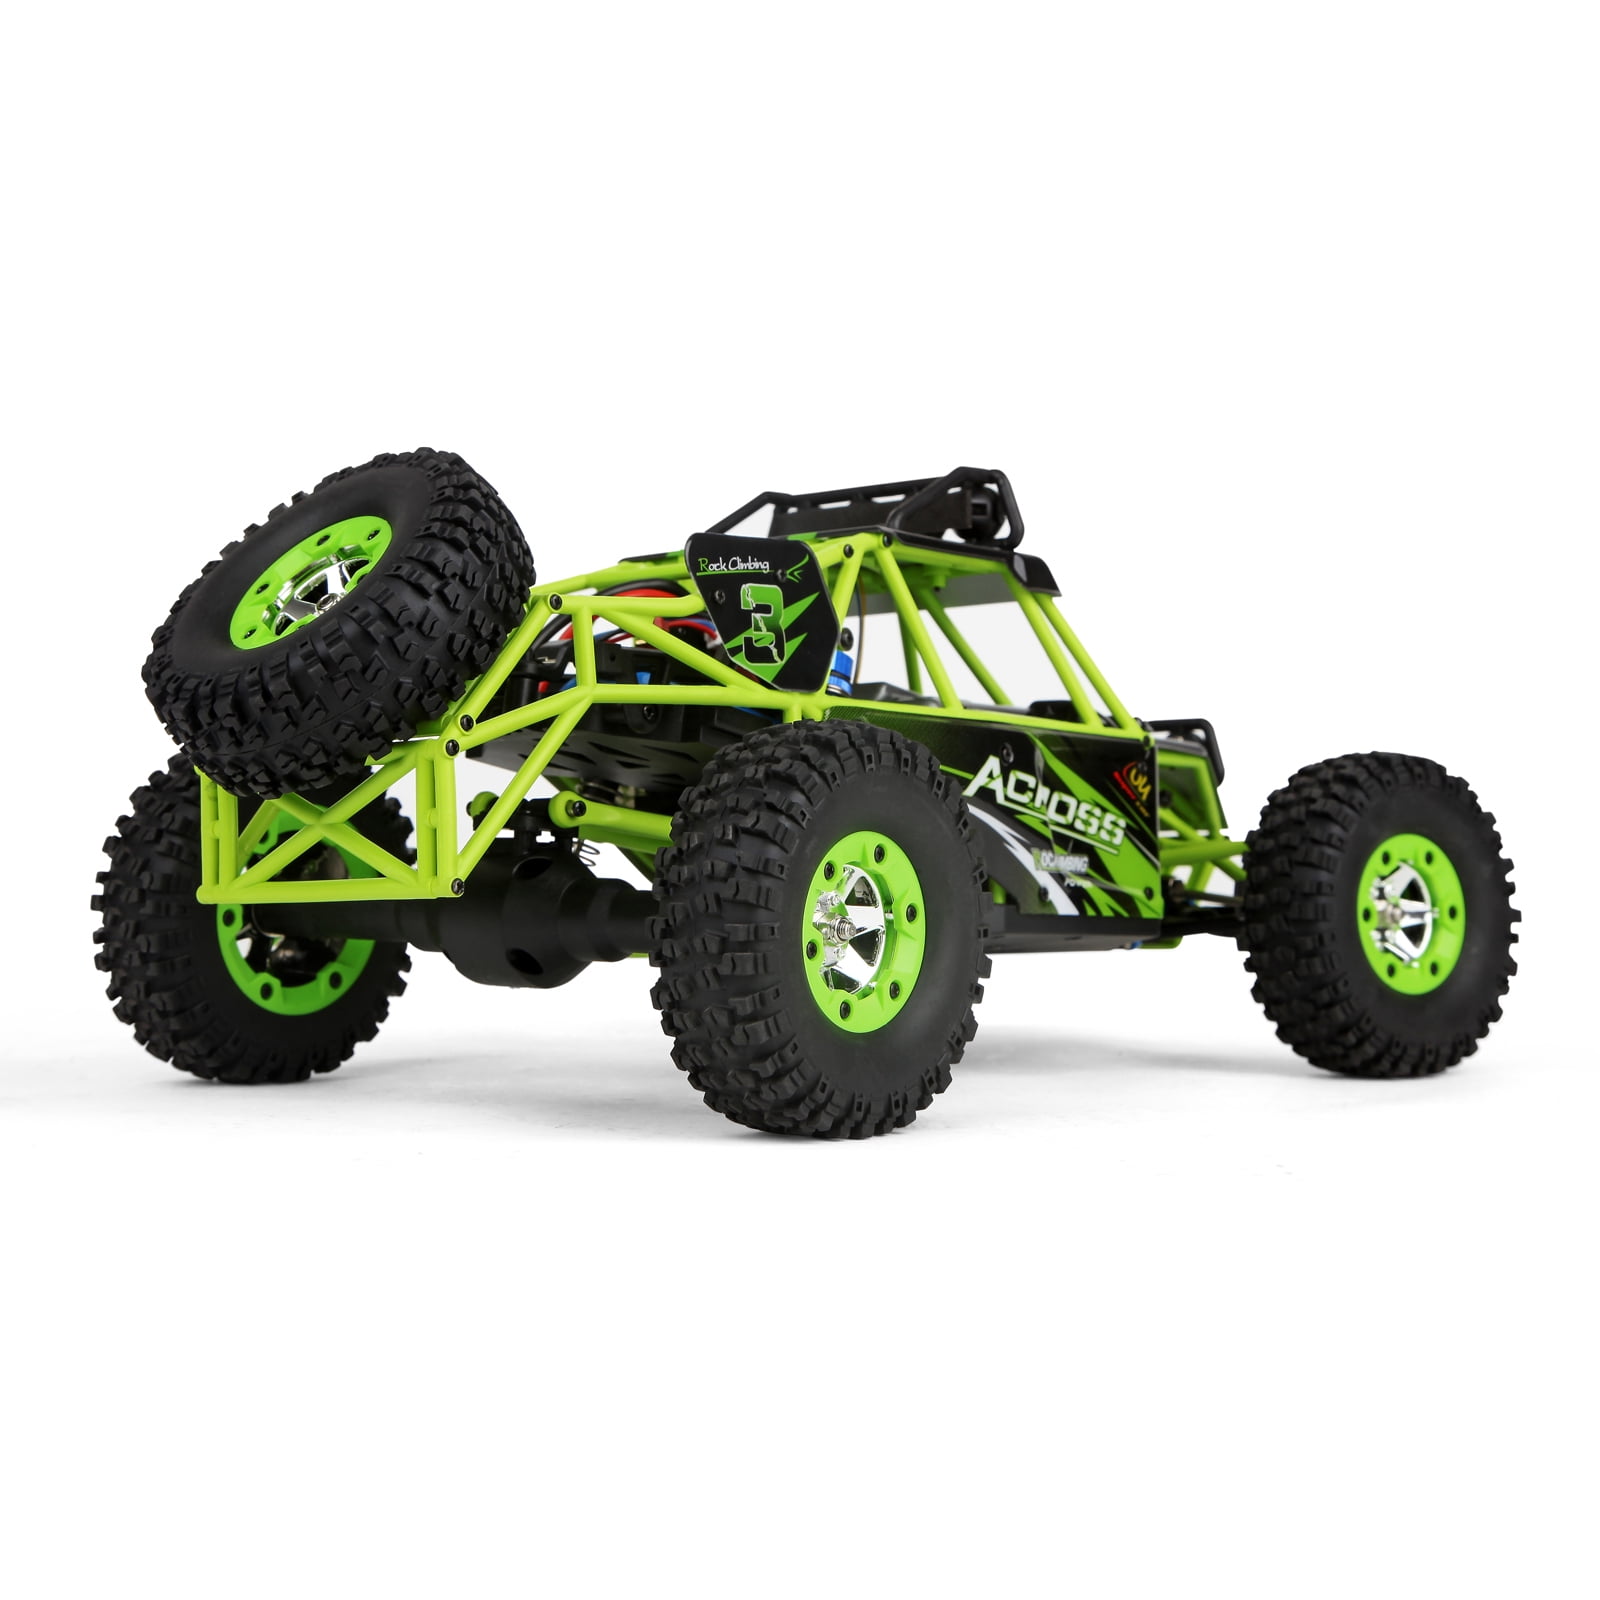 Gizmovine WLtoys RC Cars 12428 Hobby Level High Speed Fast Race Cars  Monster Truck 35mph Four-Wheel Drive Rock Crawler Electric Remote Control